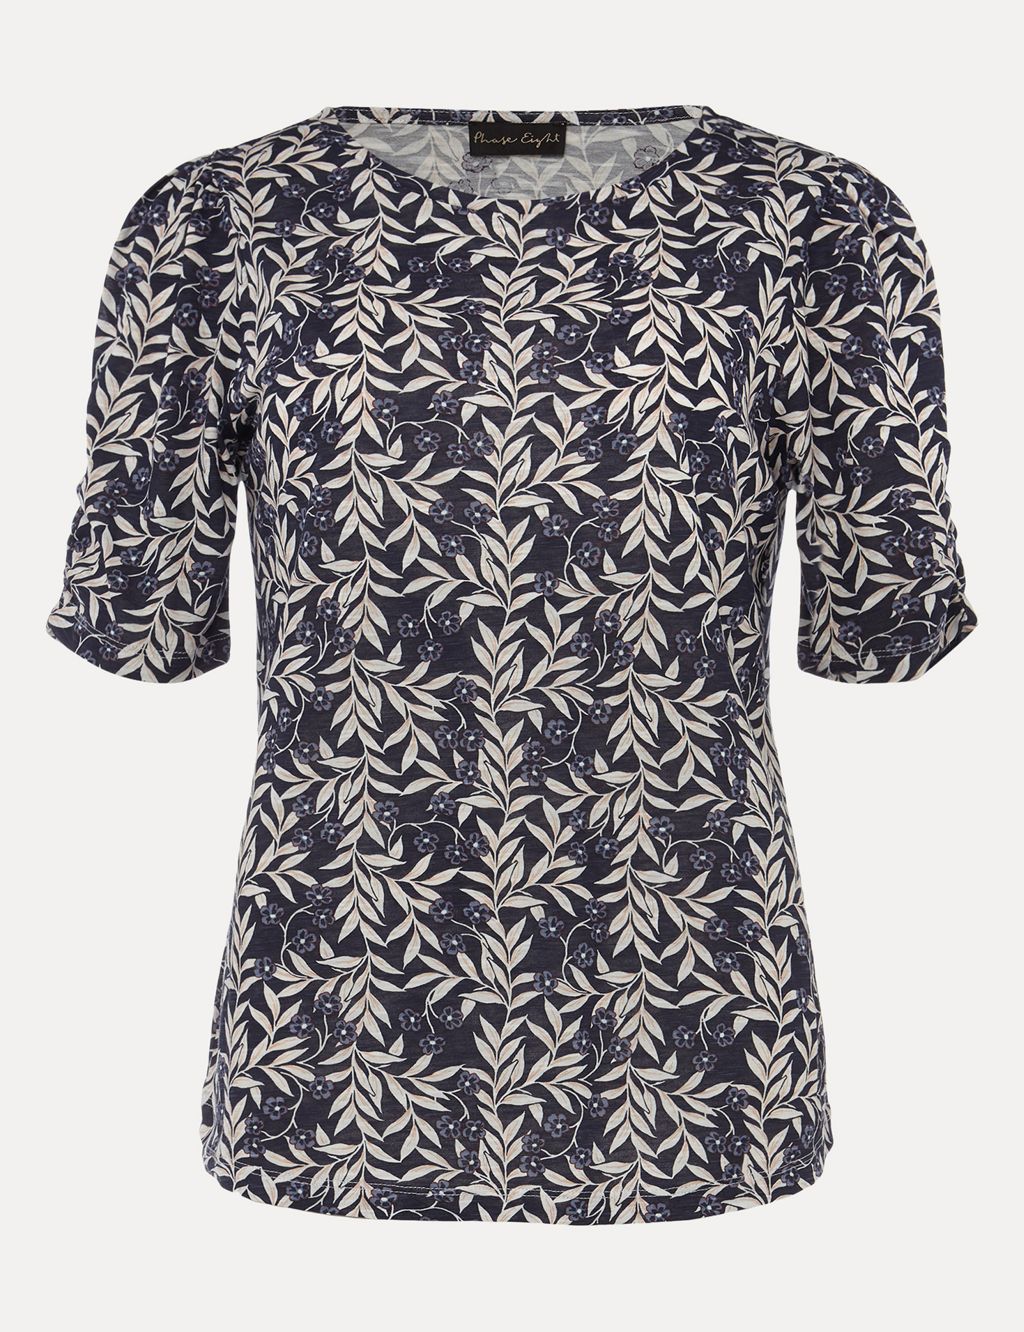 Cotton Leaf Print Short Sleeve Top | Phase Eight | M&S